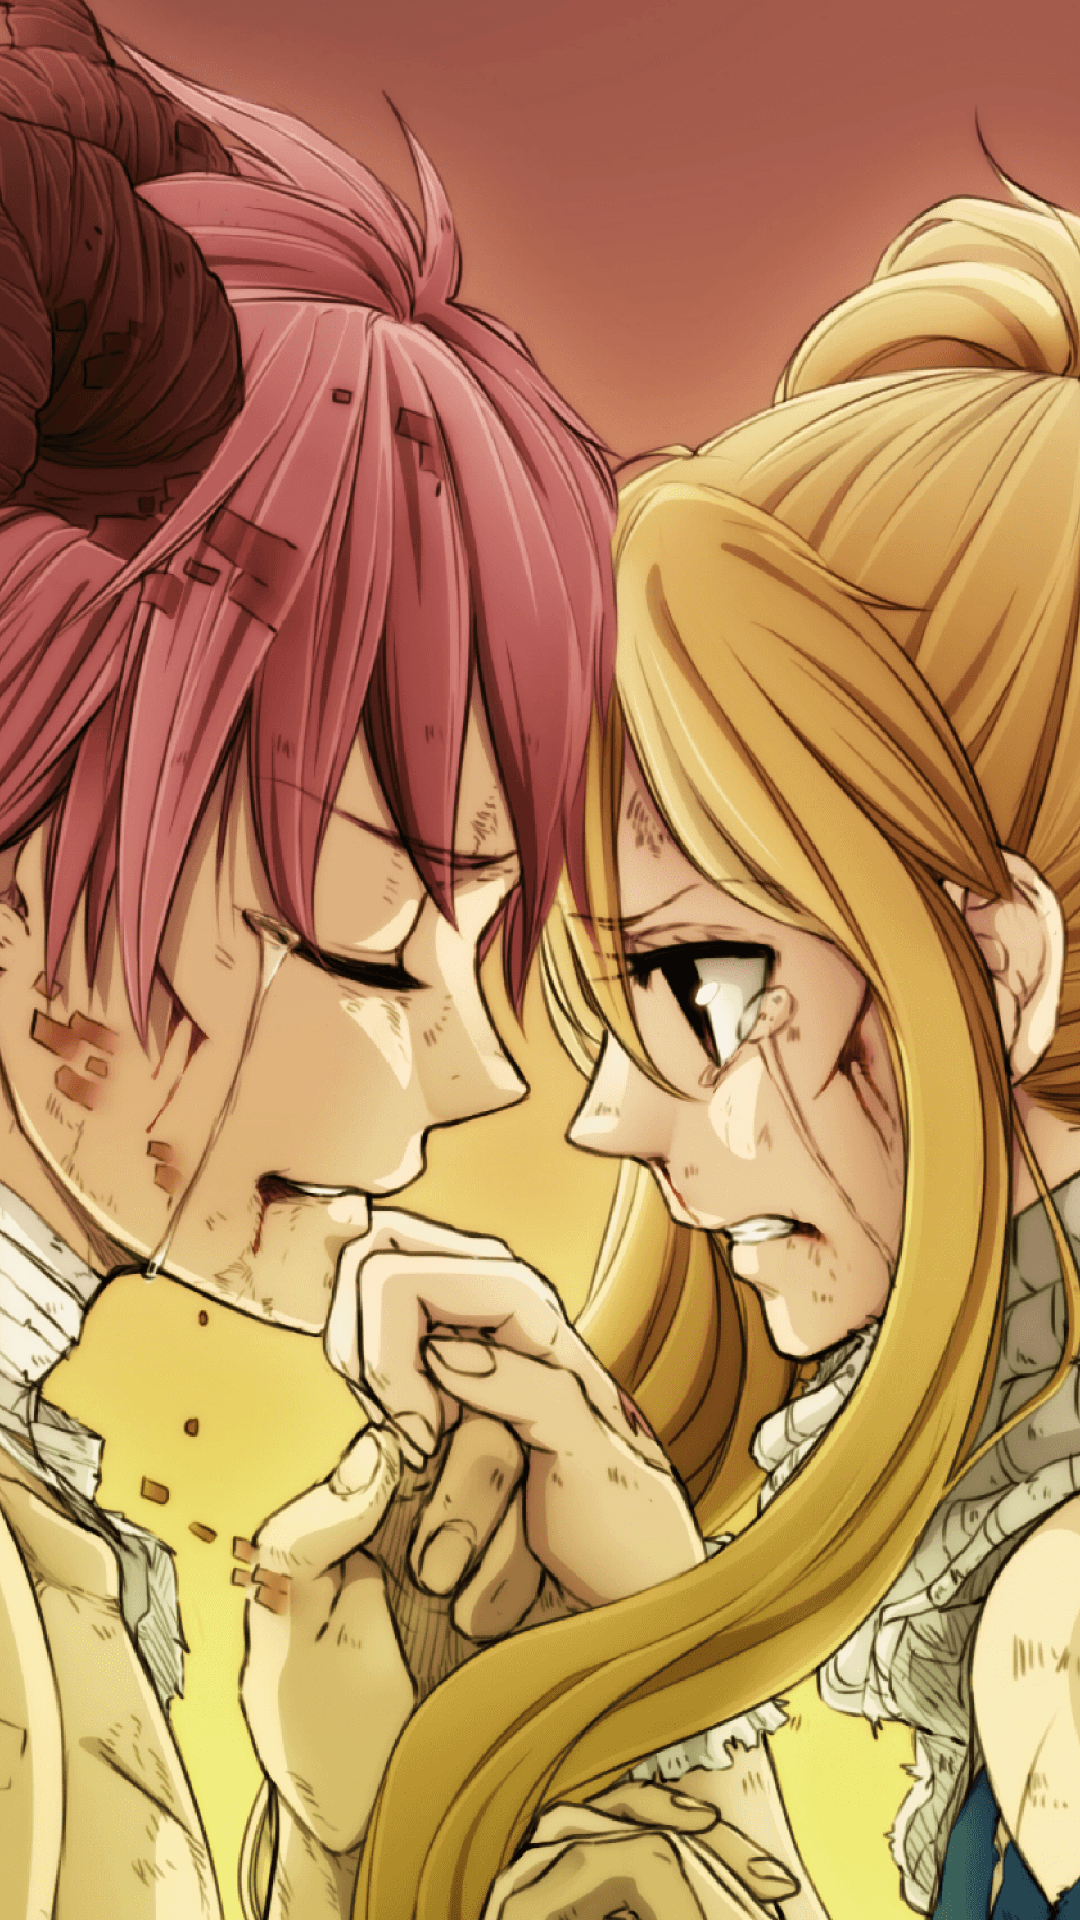 natsu and lucy fairy tail wallpaper